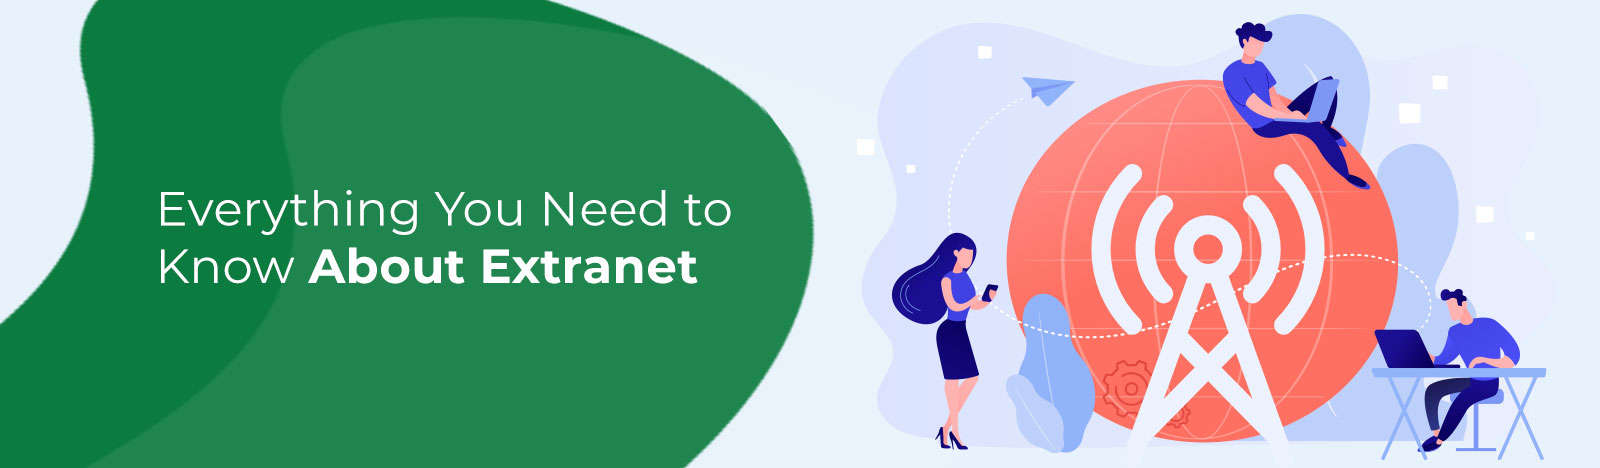 Everything You Need to Know About Extranet